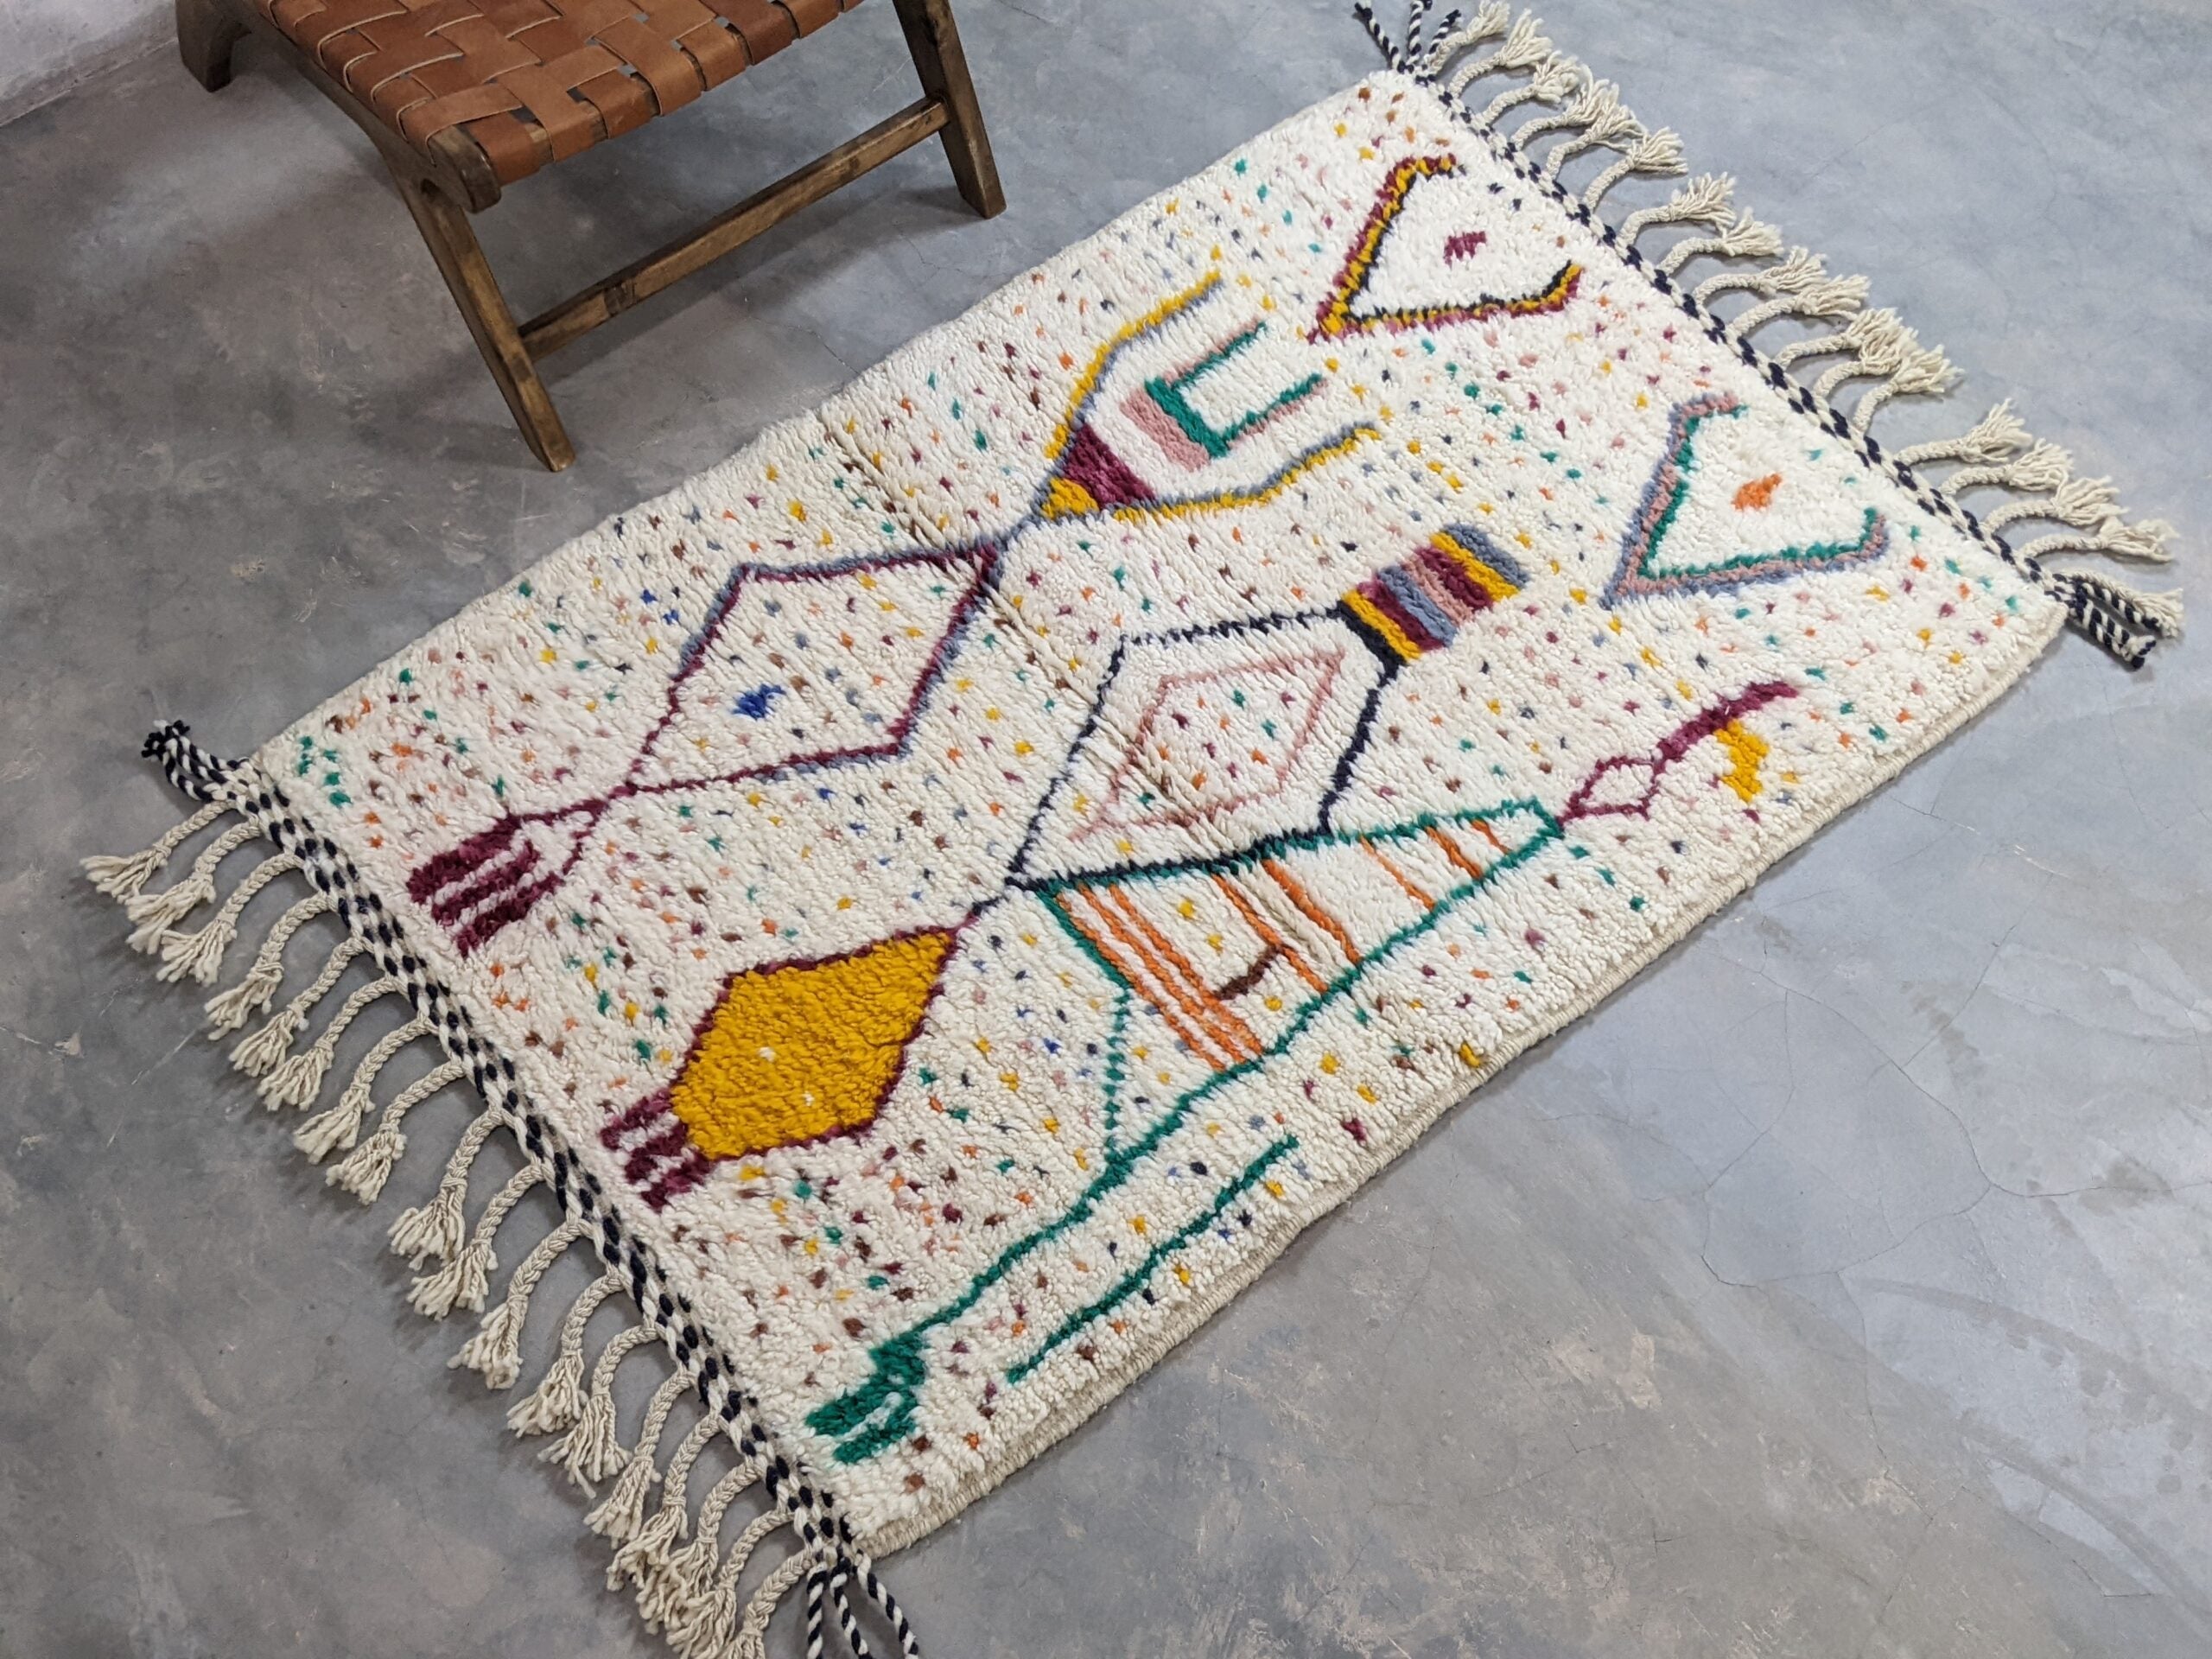 Small Berber Rugs - Handwoven Moroccan Beauty